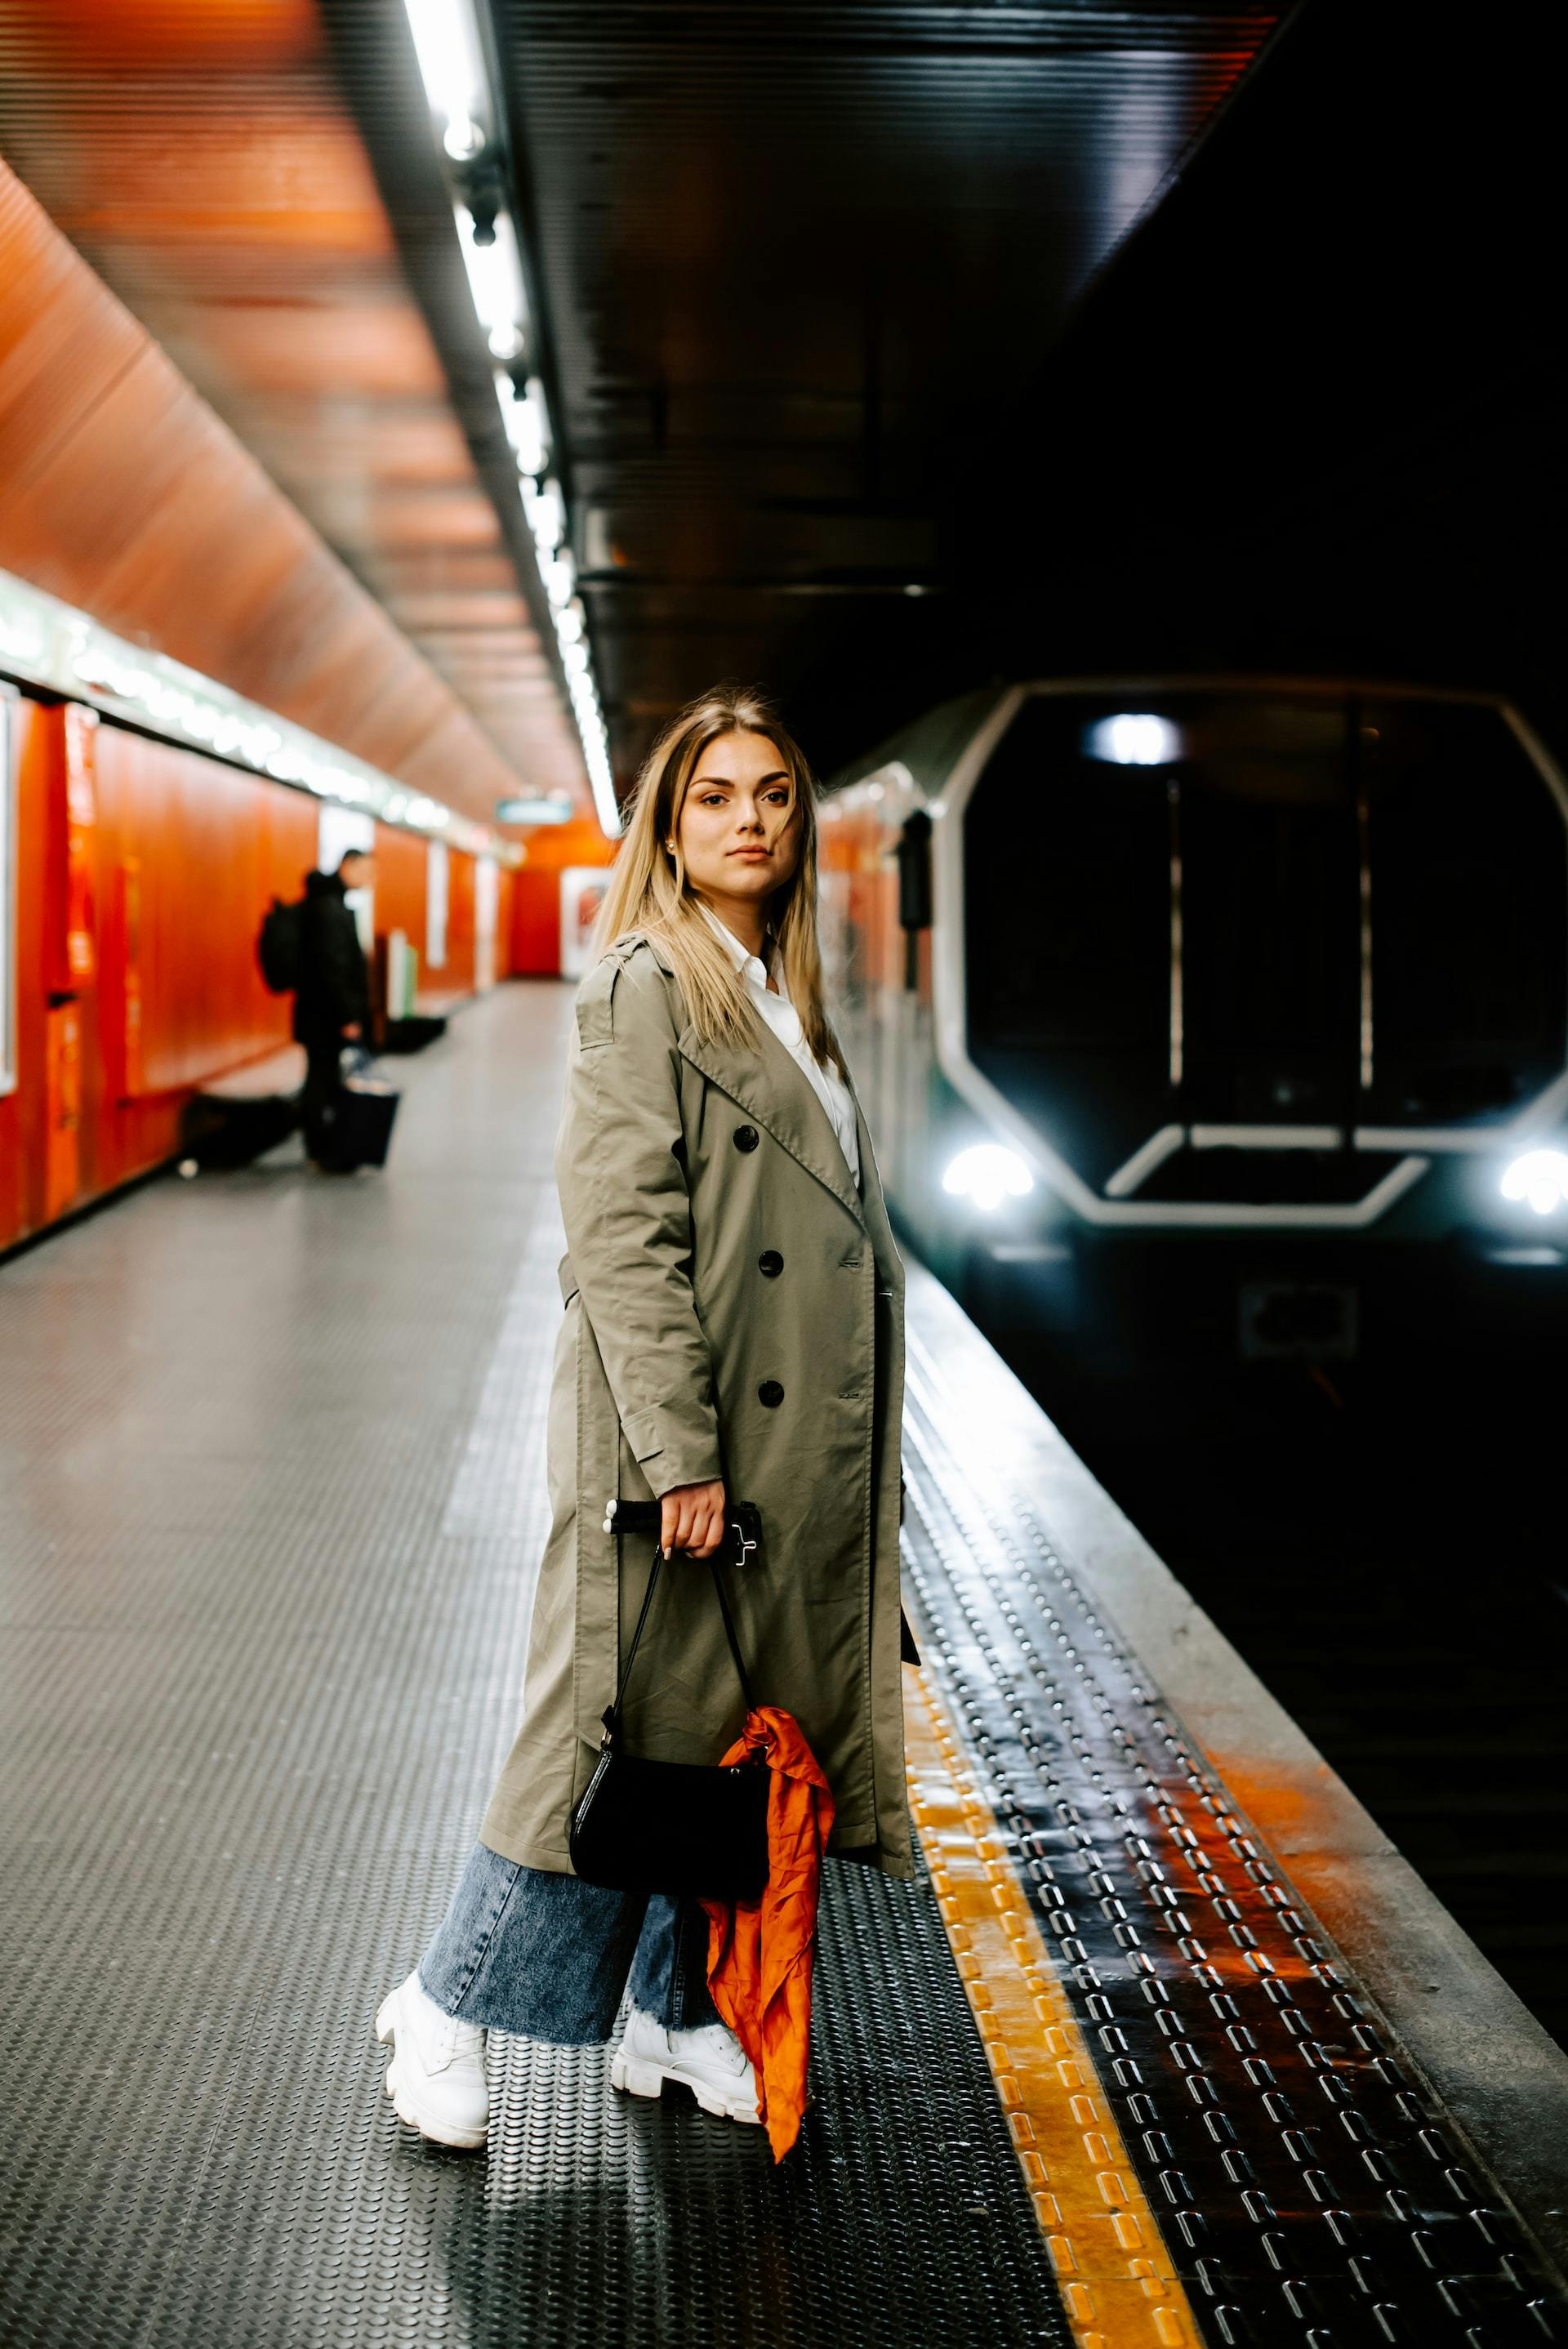 A girl posing for a photo shoot in a station